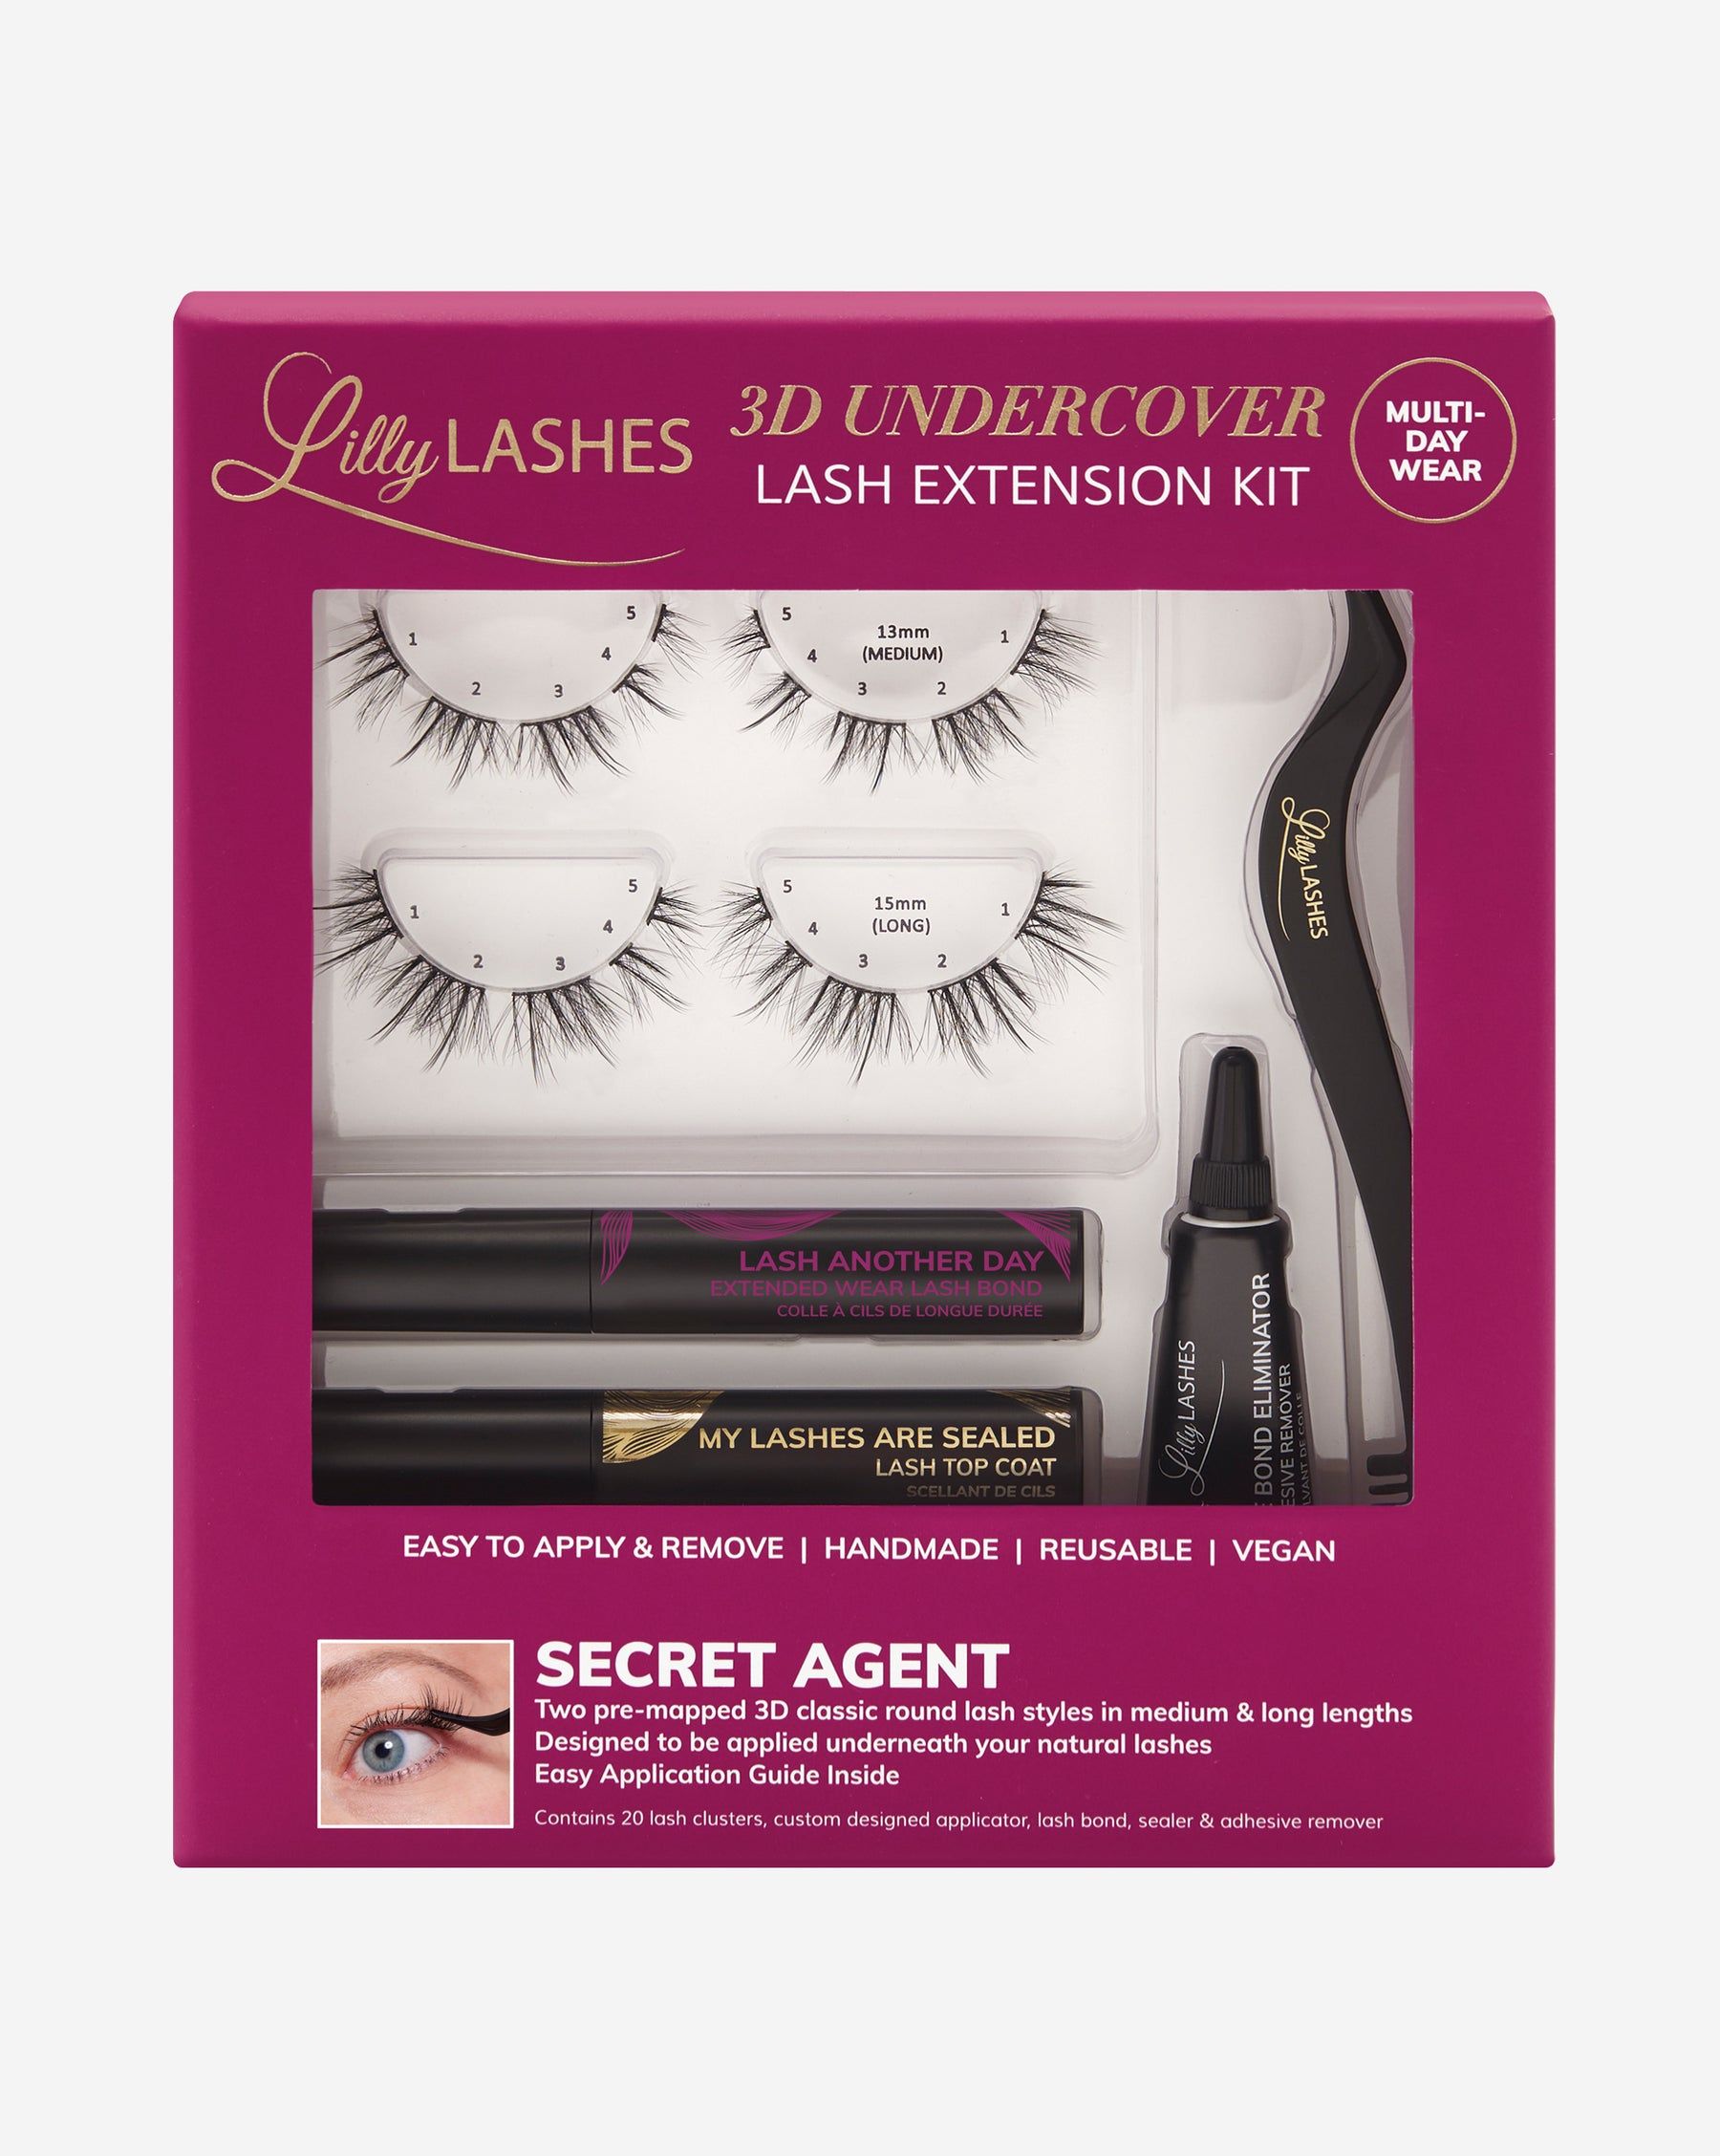 Secret Agent 3D Undercover Lash System | Lilly Lashes